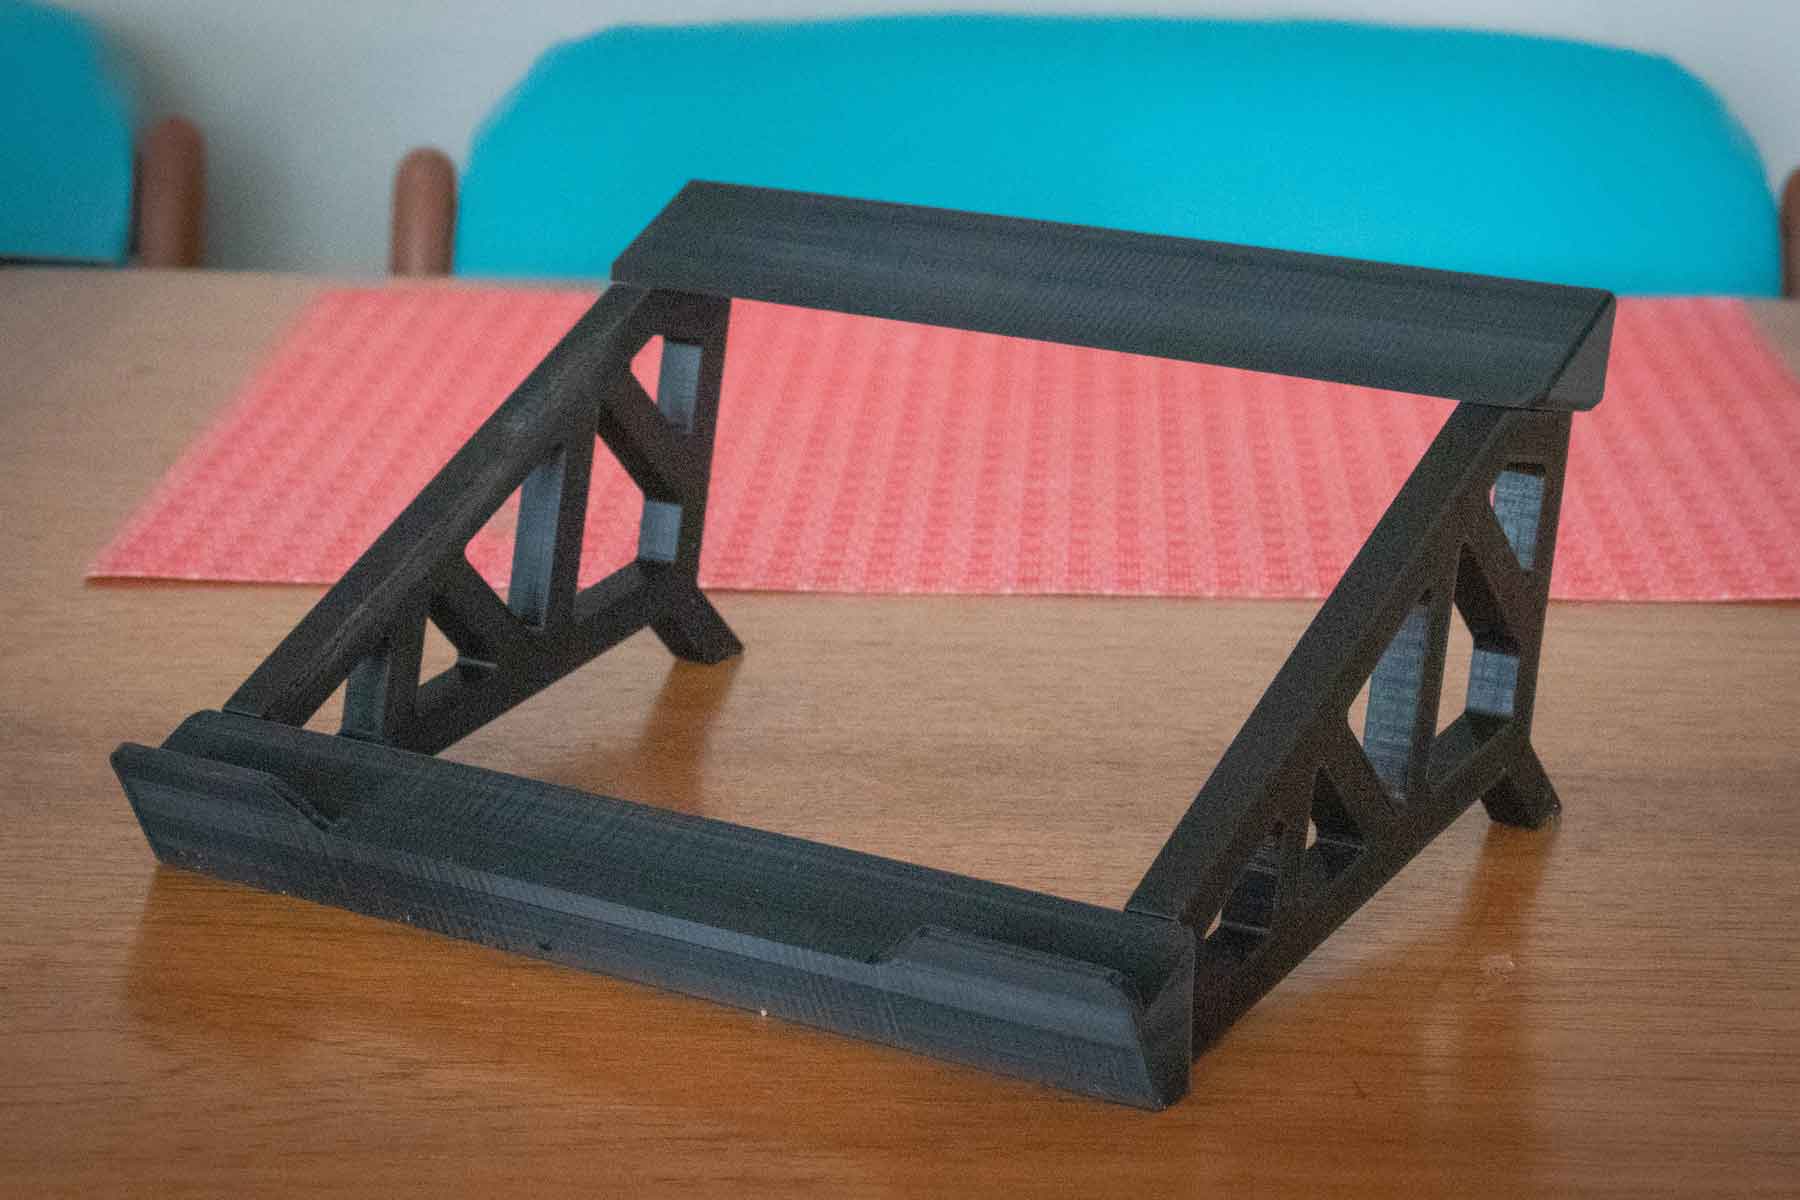 3d printed laptop stand, assembled